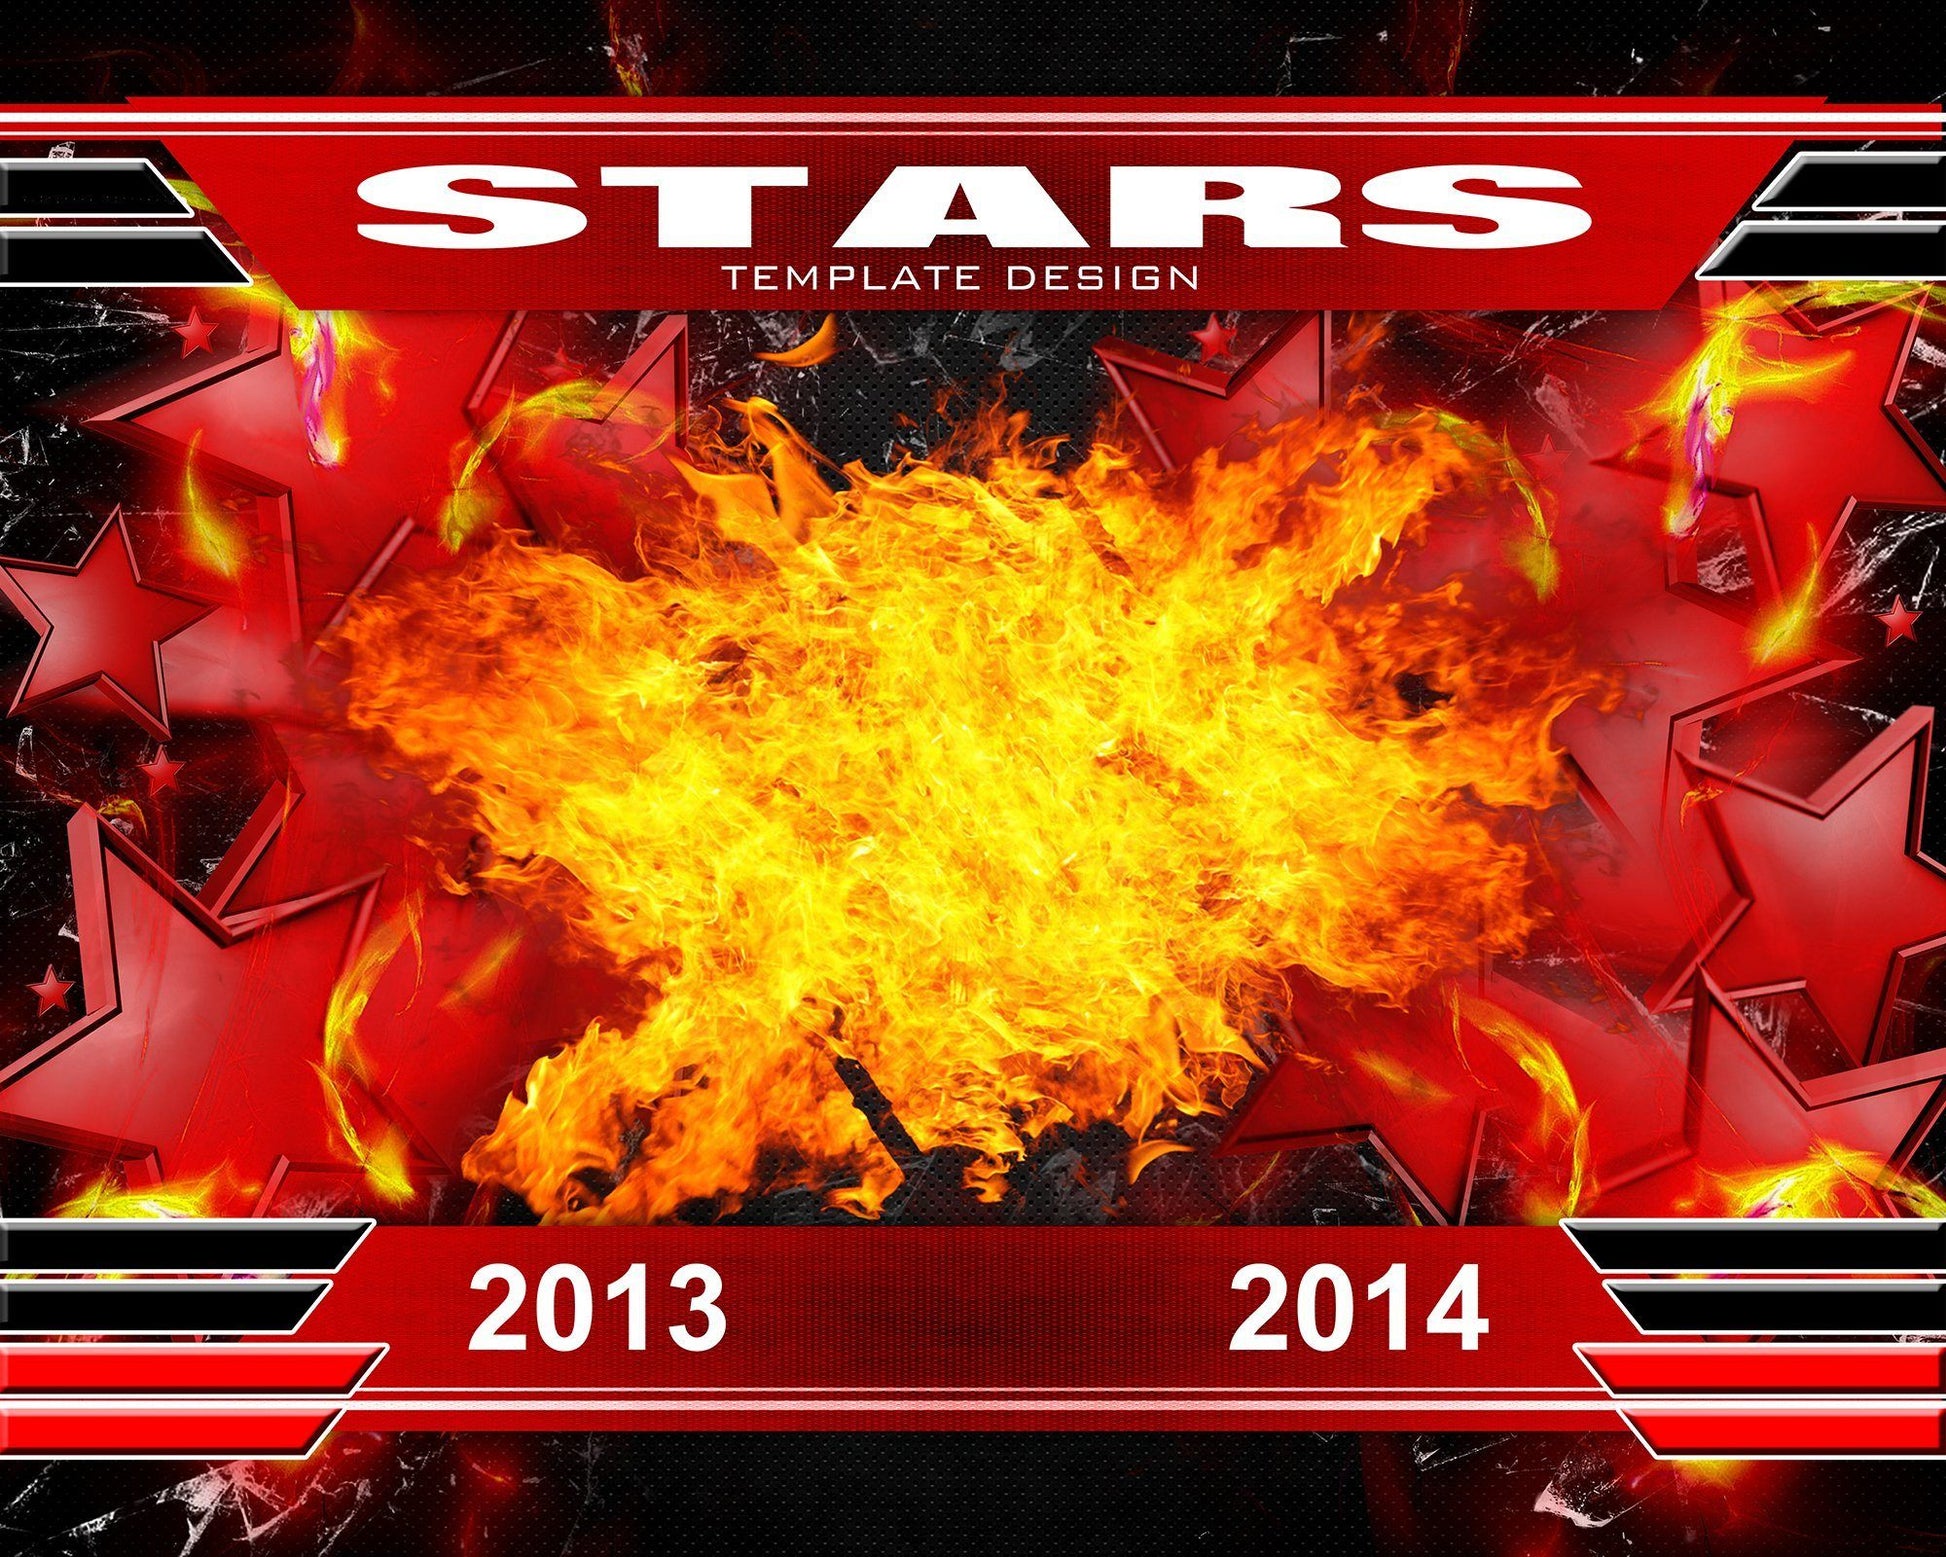 Stars v.3 - Xtreme Team-Photoshop Template - Photo Solutions